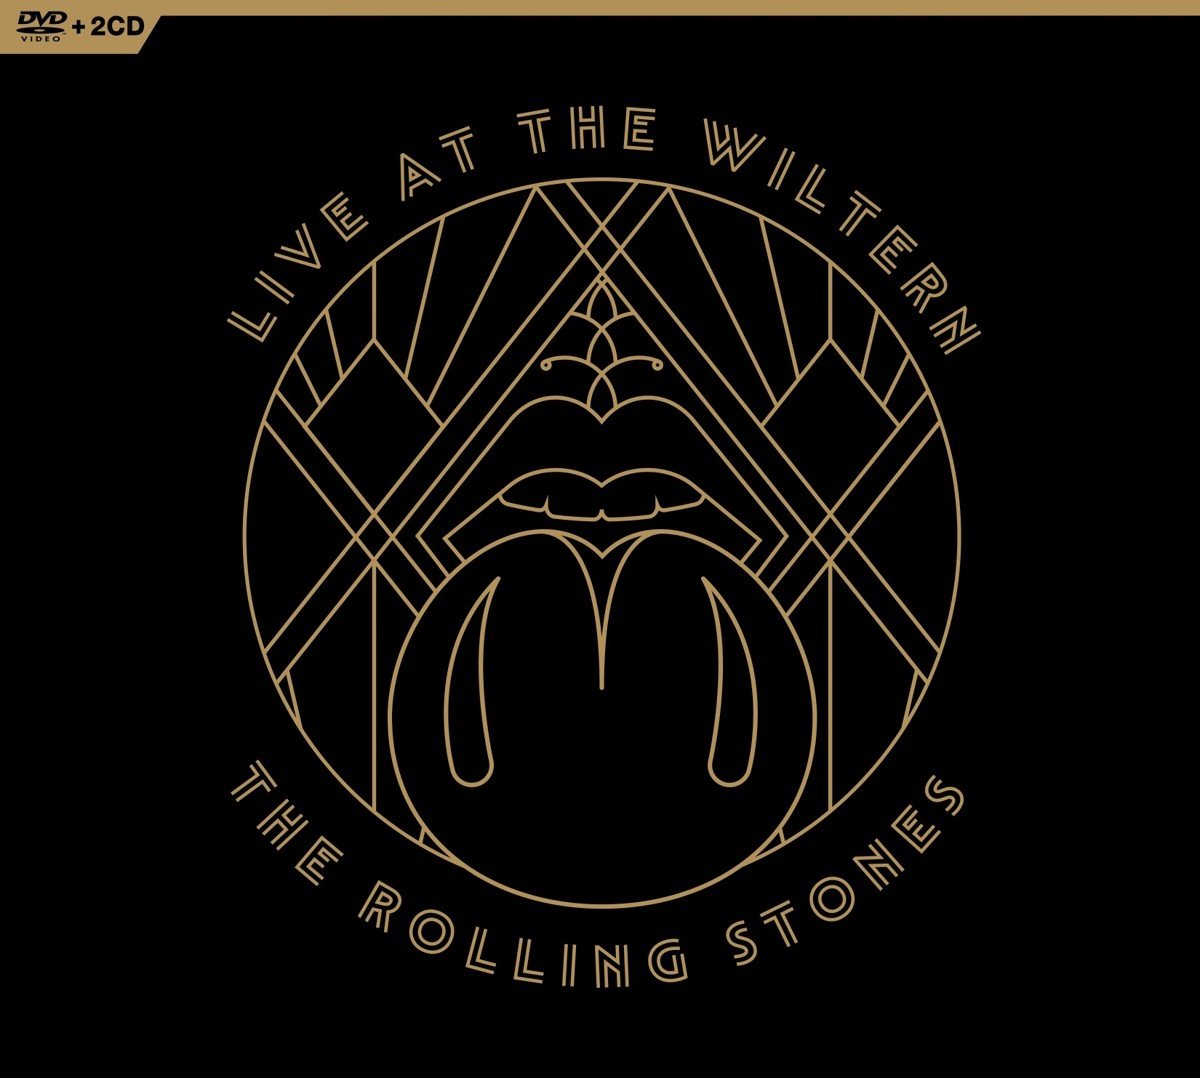 The Rolling Stones - Live At The Wiltern (DVD) - Rolling Stones